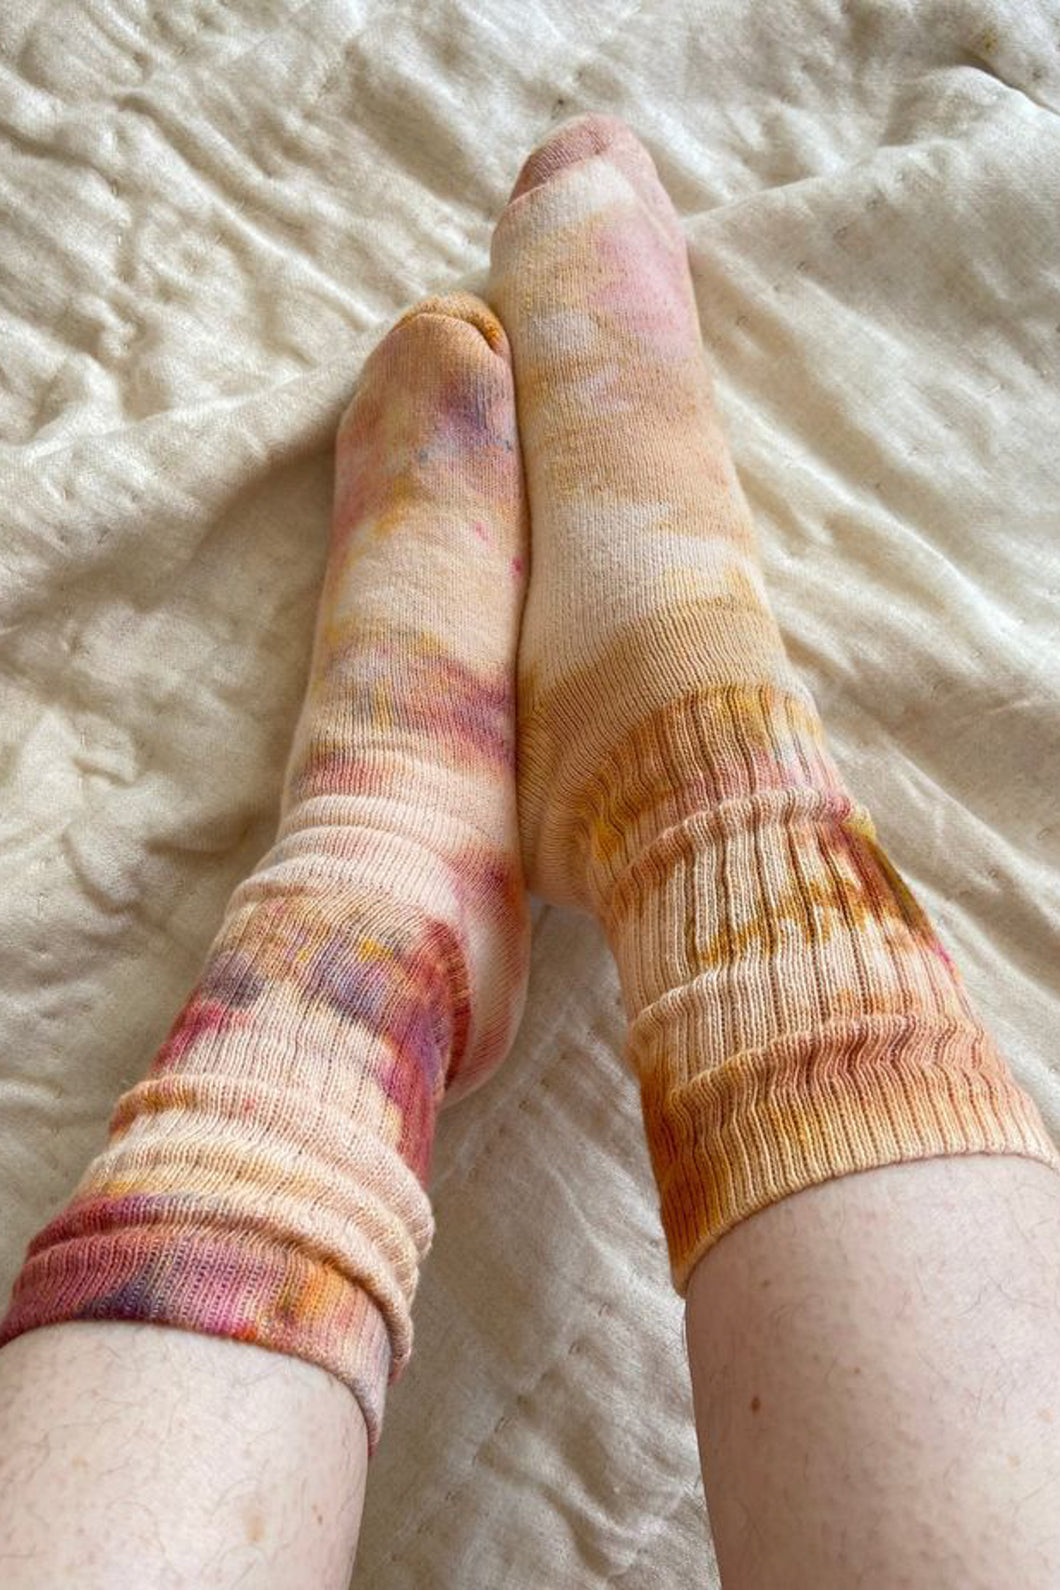 Oranic Cotton Tie Dyed Socks Yellow and pink